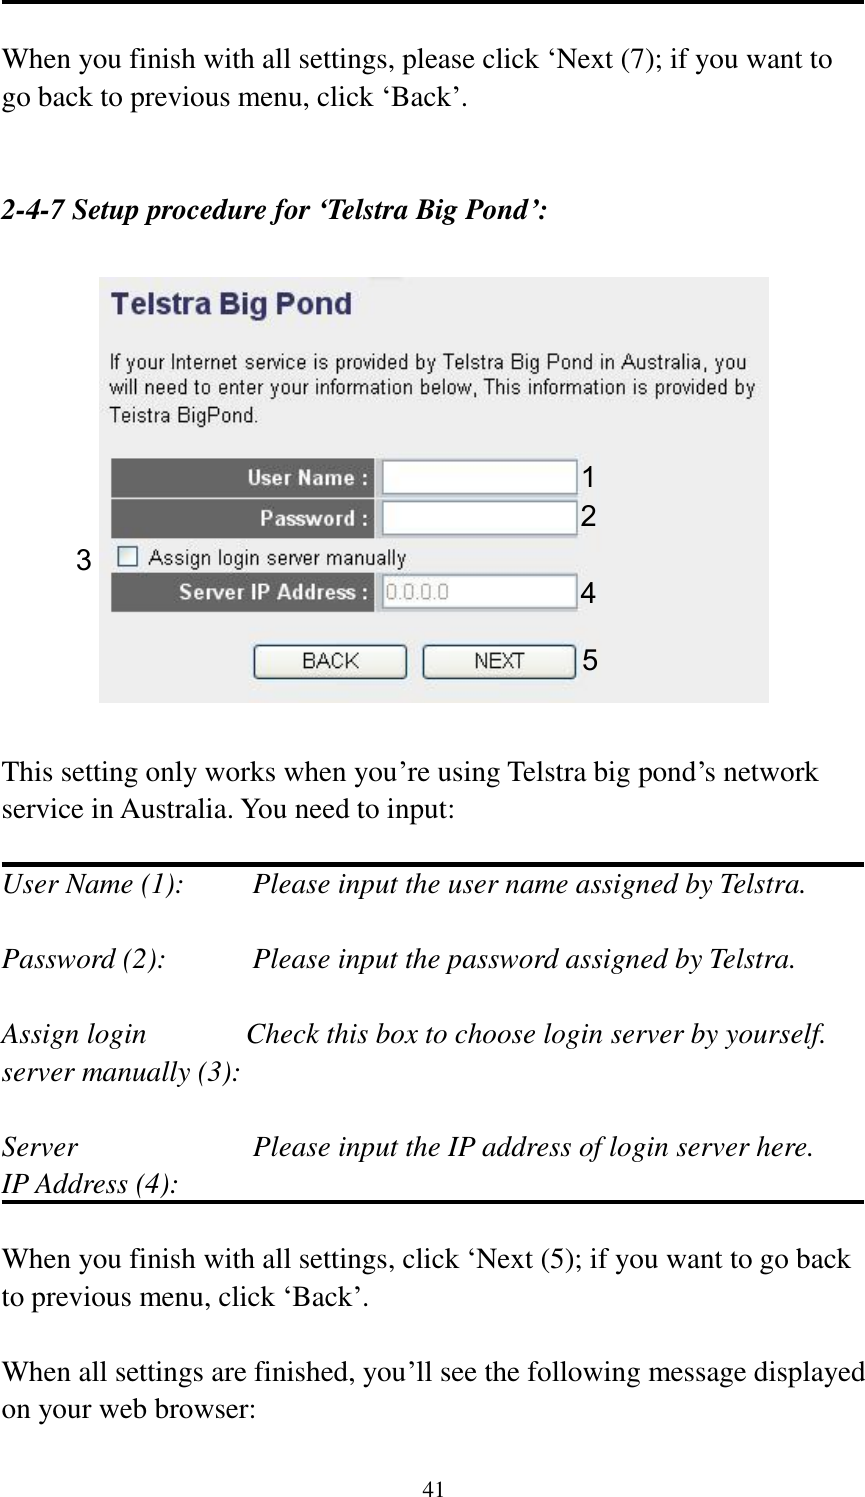 41  When you finish with all settings, please click „Next (7); if you want to go back to previous menu, click „Back‟.   2-4-7 Setup procedure for ‘Telstra Big Pond’:    This setting only works when you‟re using Telstra big pond‟s network service in Australia. You need to input:  User Name (1):     Please input the user name assigned by Telstra.  Password (2):      Please input the password assigned by Telstra.  Assign login       Check this box to choose login server by yourself. server manually (3):    Server                        Please input the IP address of login server here. IP Address (4):  When you finish with all settings, click „Next (5); if you want to go back to previous menu, click „Back‟.  When all settings are finished, you‟ll see the following message displayed on your web browser: 1 2 3 4 5 